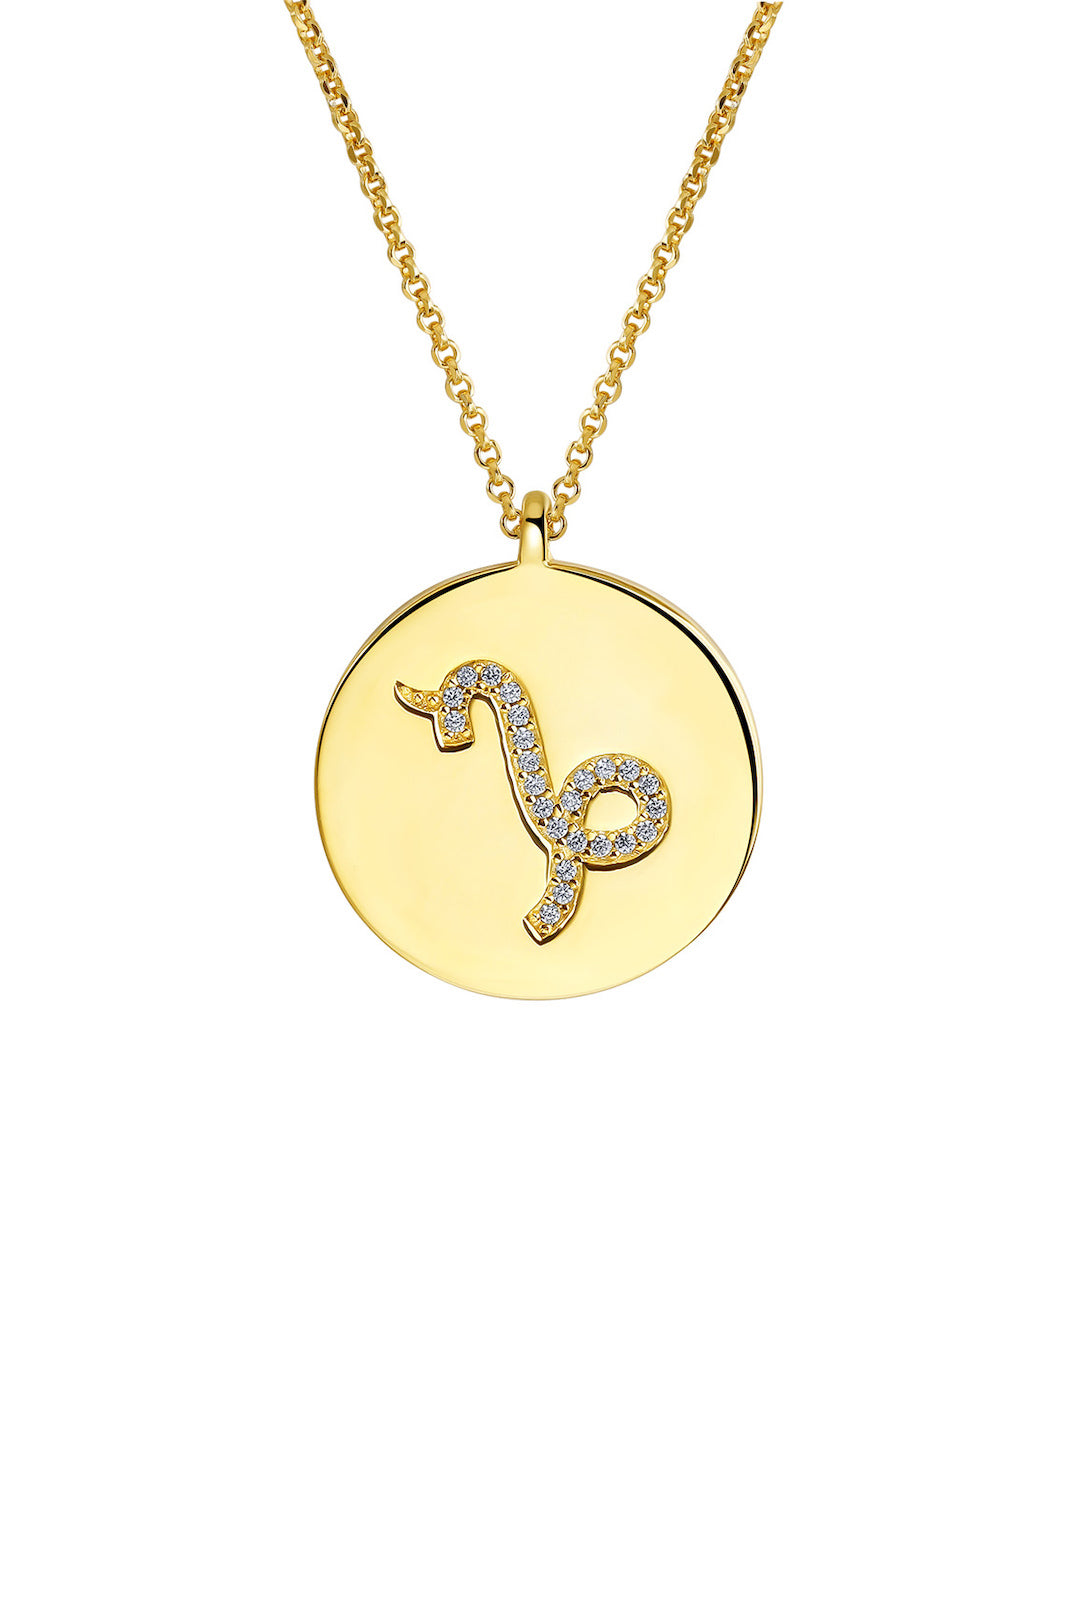 18kt Gold Plated Astrology Necklace with Zodiac Pendant of Capricorn -  MusicBoxAttic.com